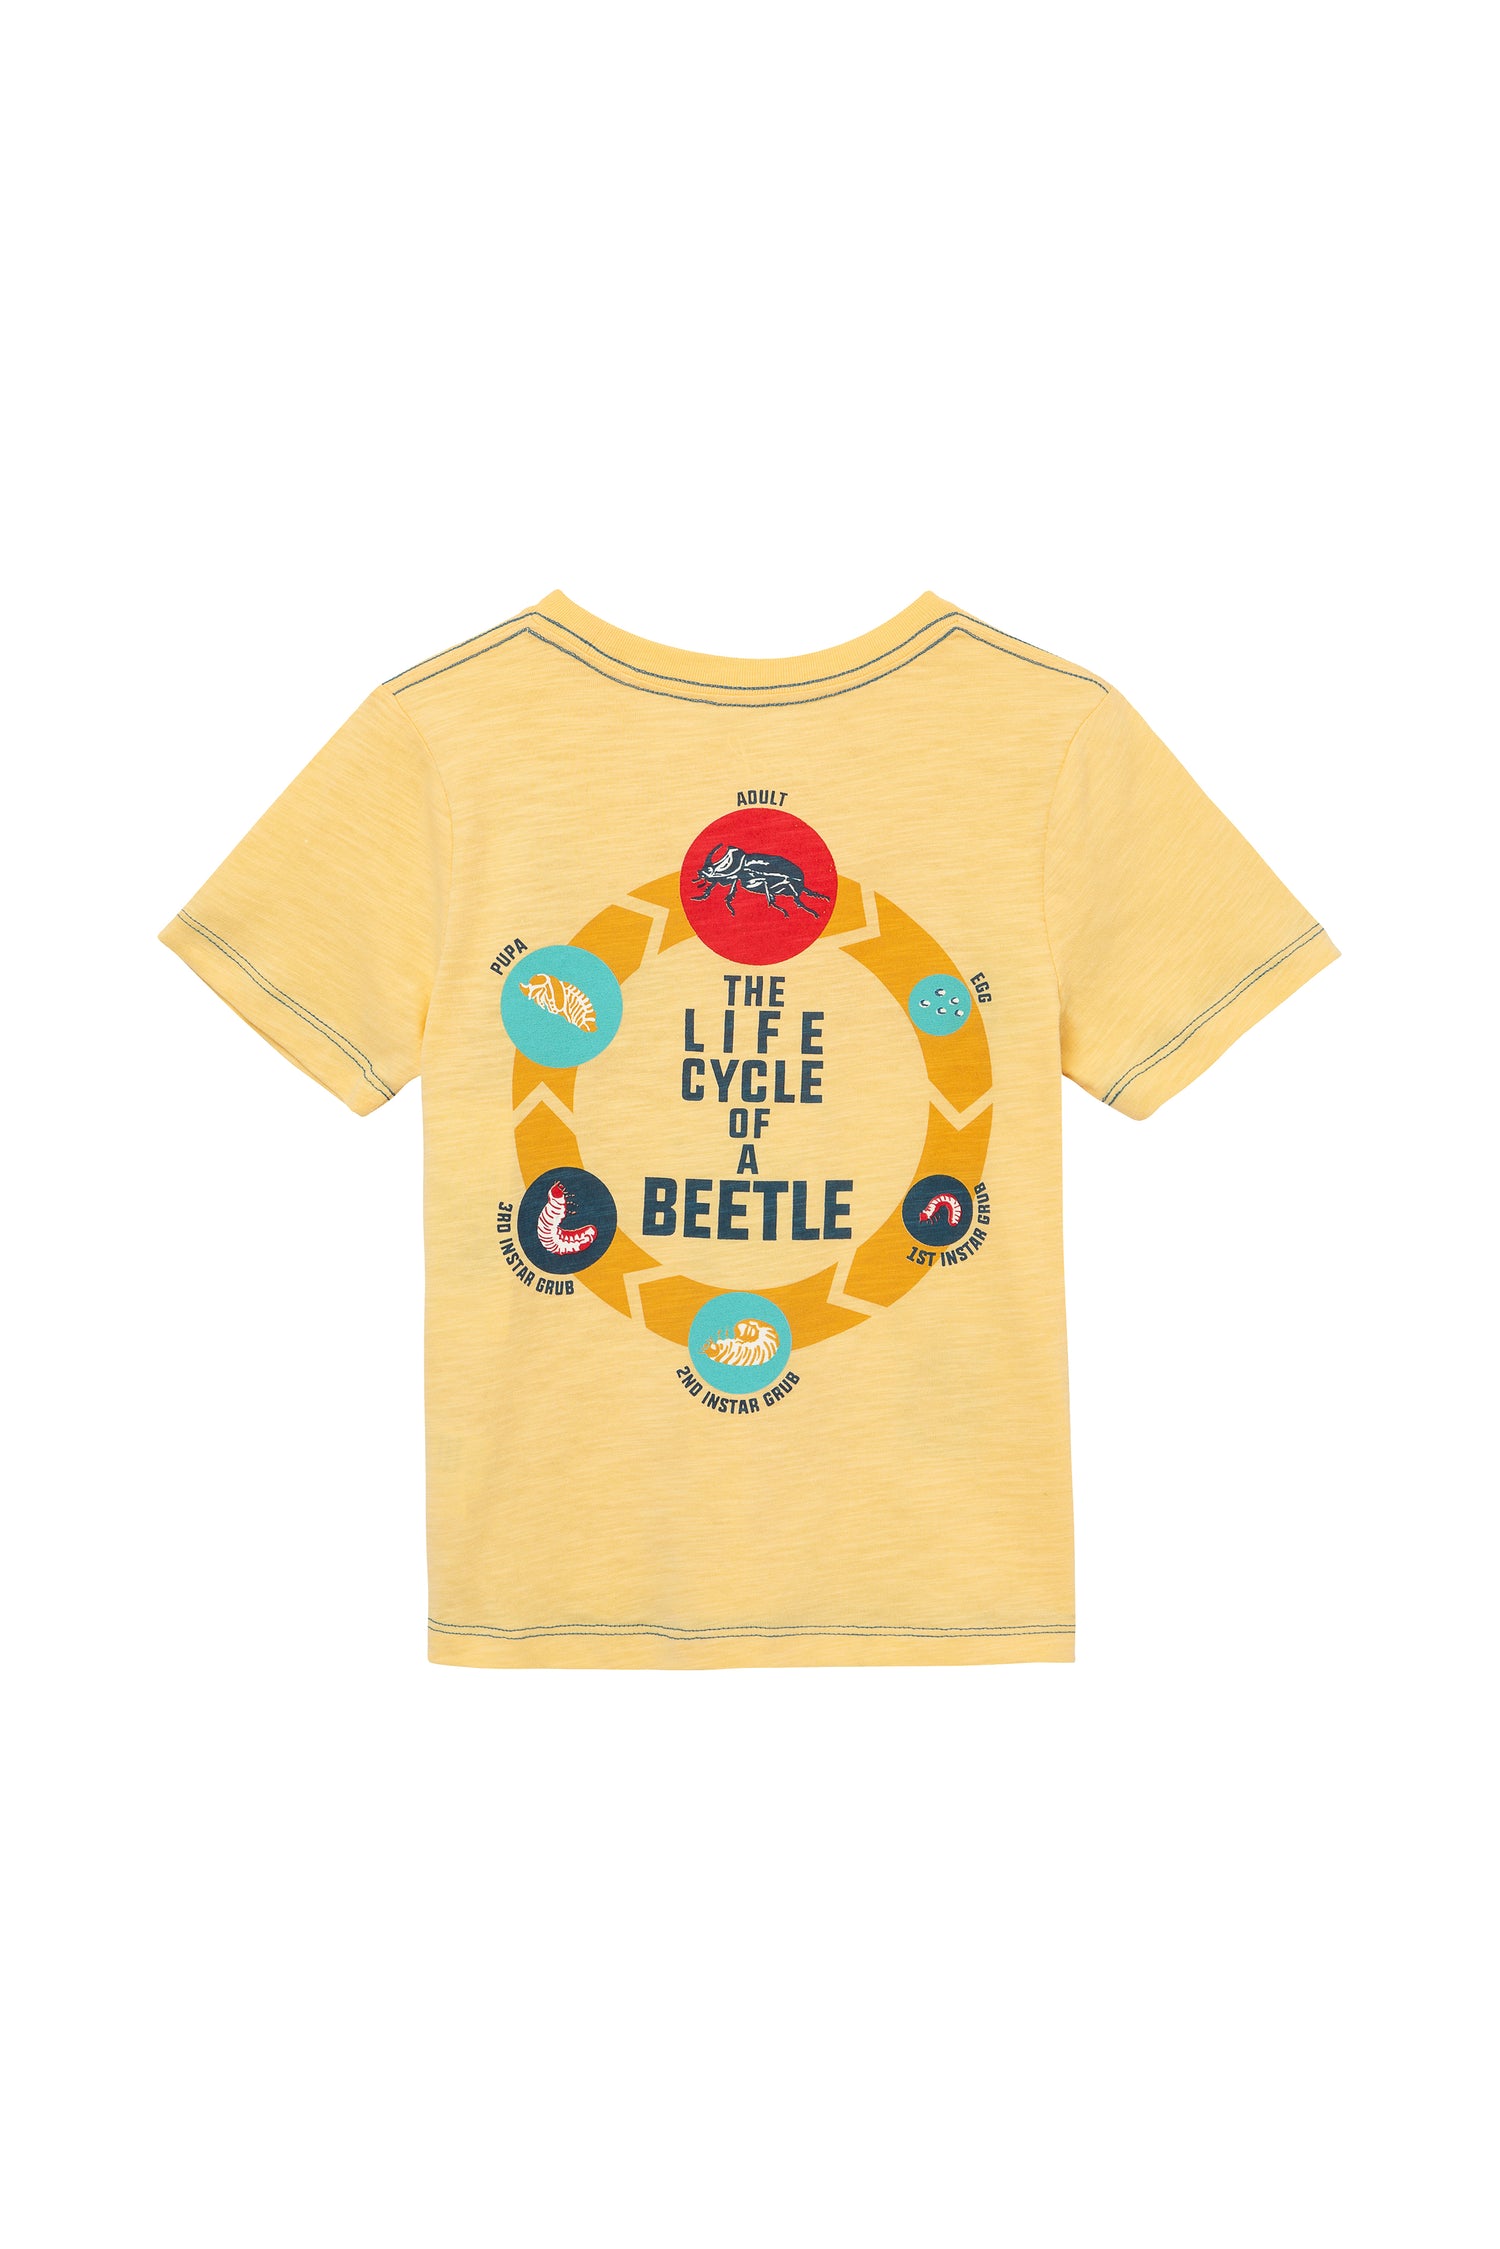 BACK OF YELLOW T-SHIRT WITH THE LIFE CYCLE OF A BEETLE GRAPHICS